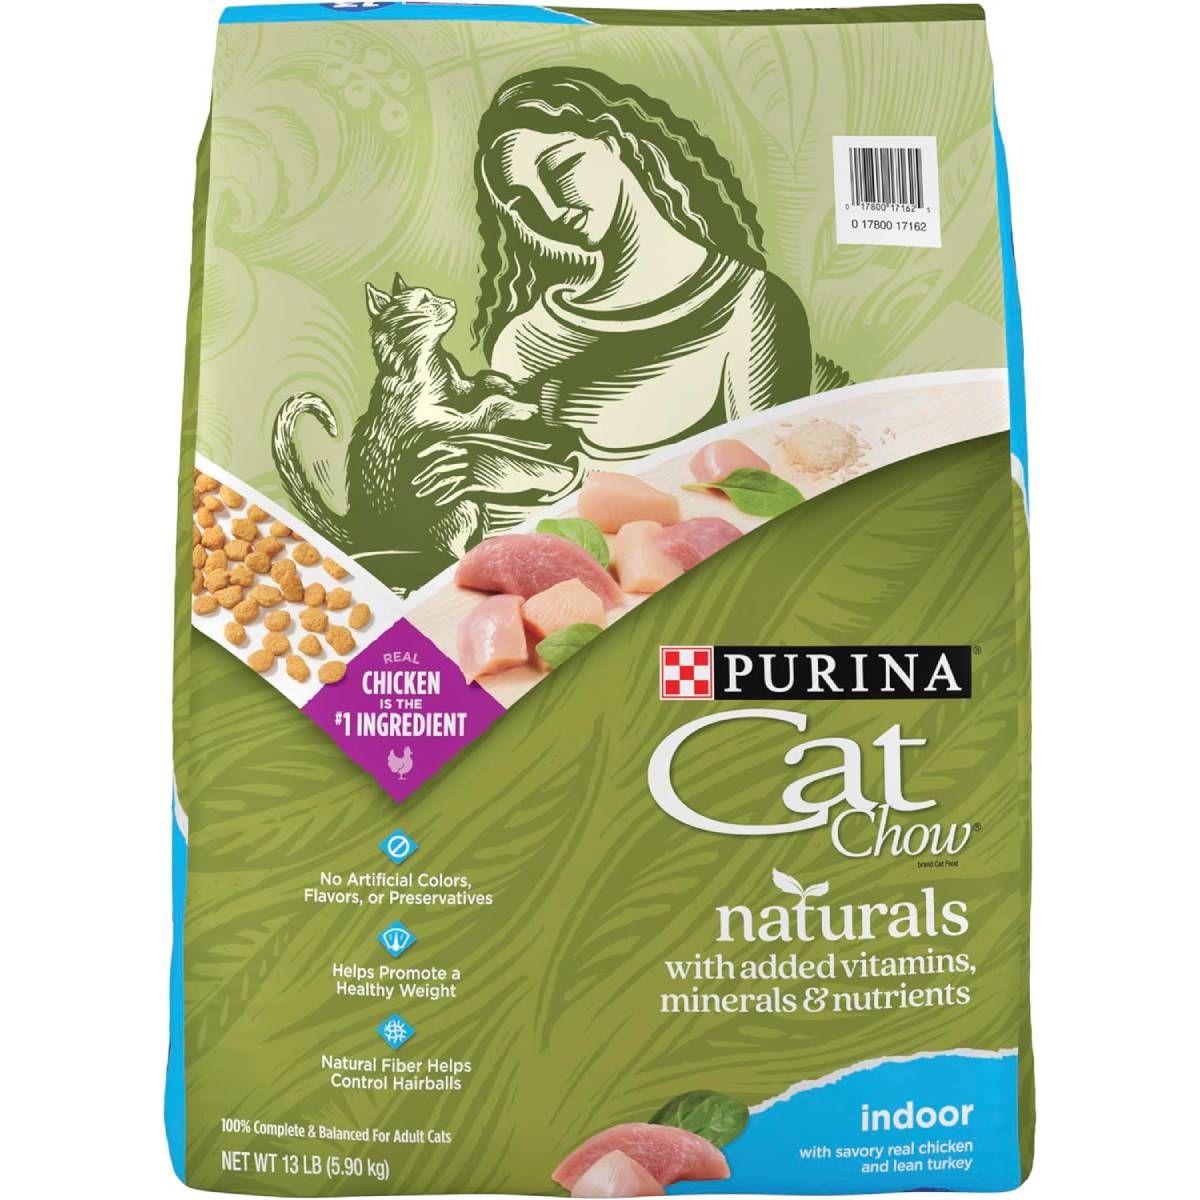 Purina Cat Chow Naturals Hairball & Weight Control